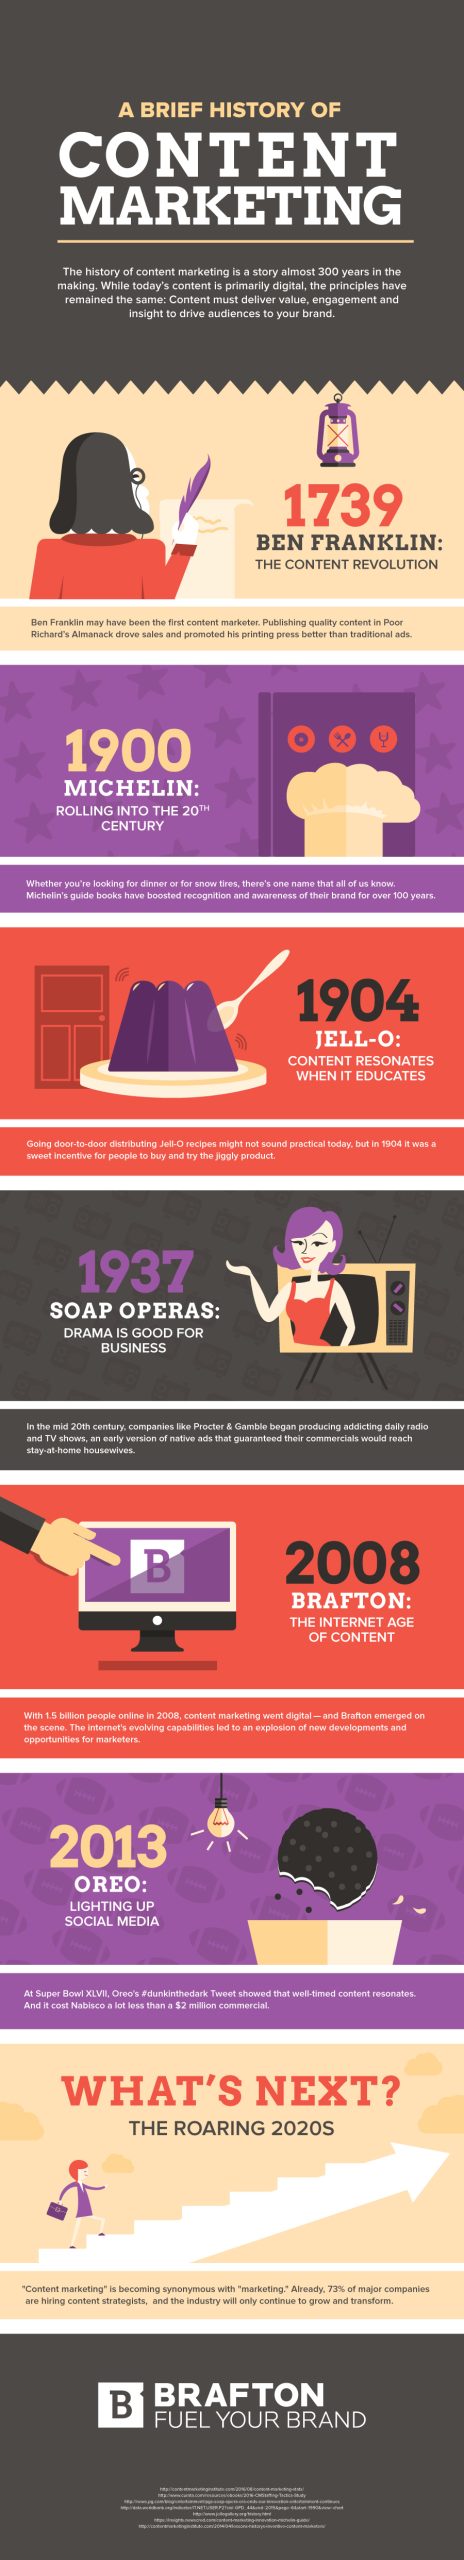 The history of content marketing